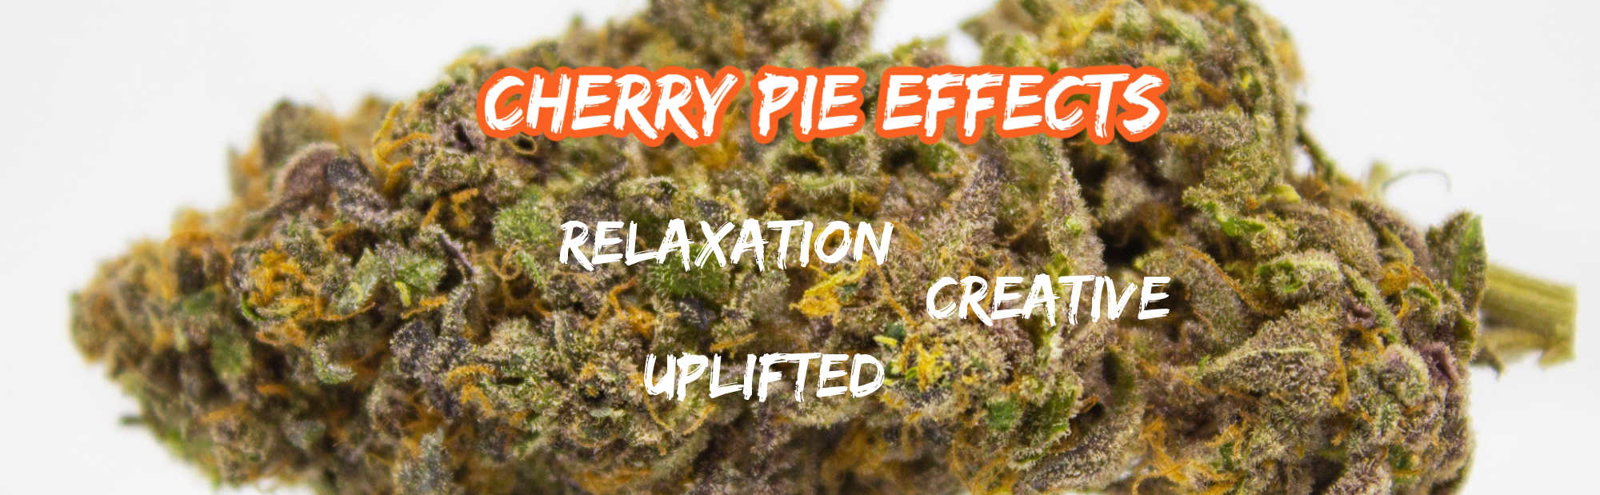 image of cherry pie effects